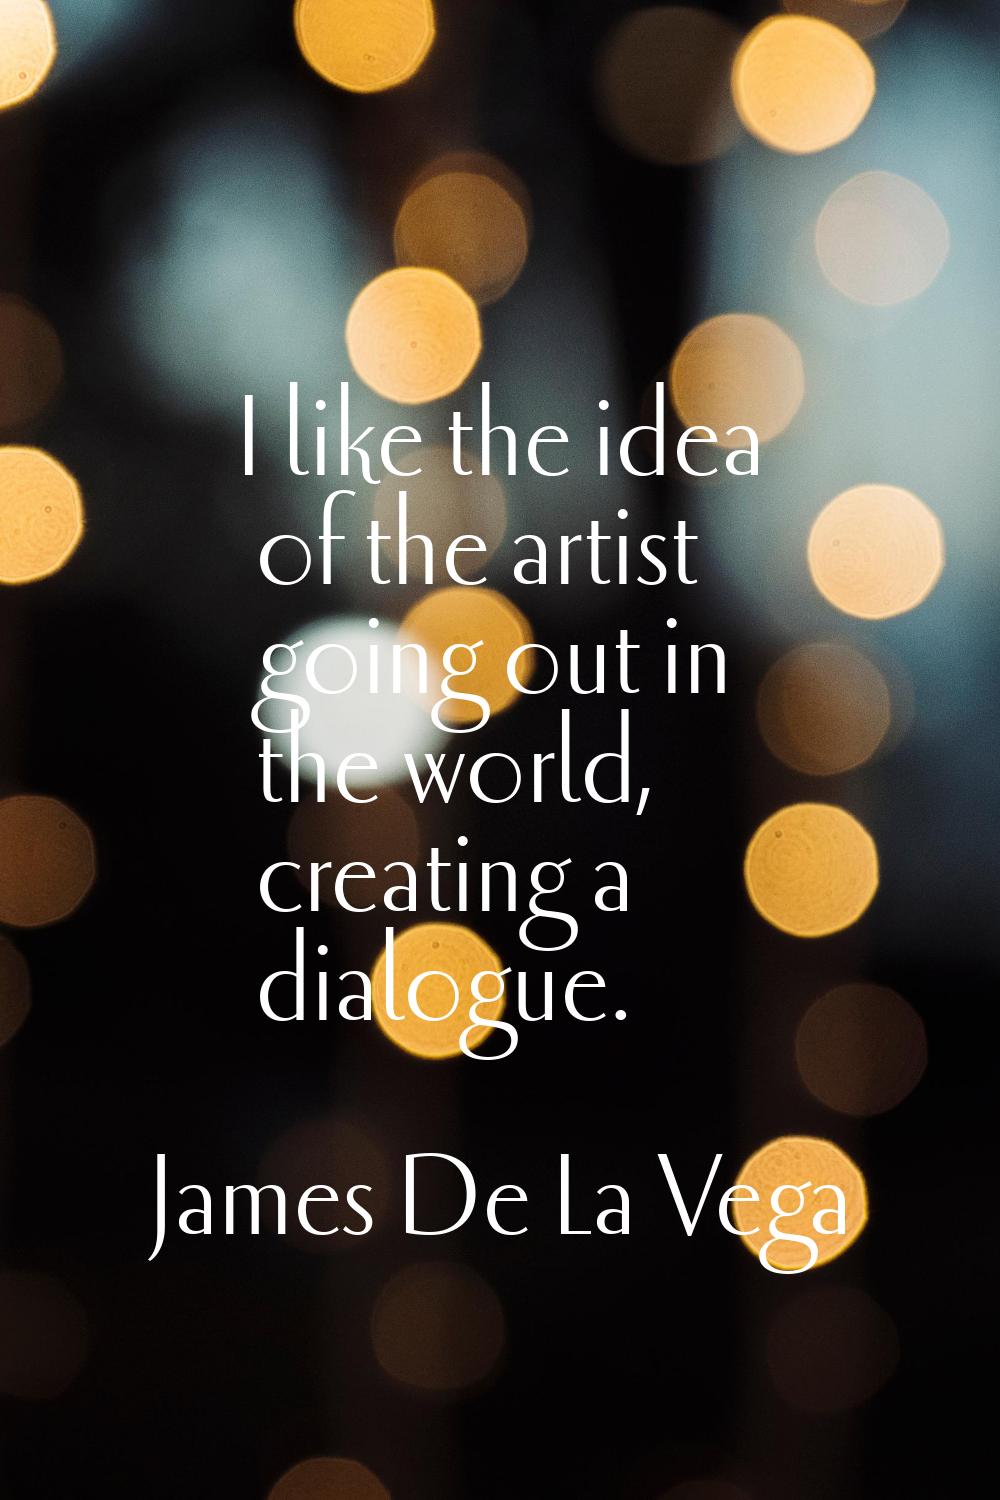 I like the idea of the artist going out in the world, creating a dialogue.